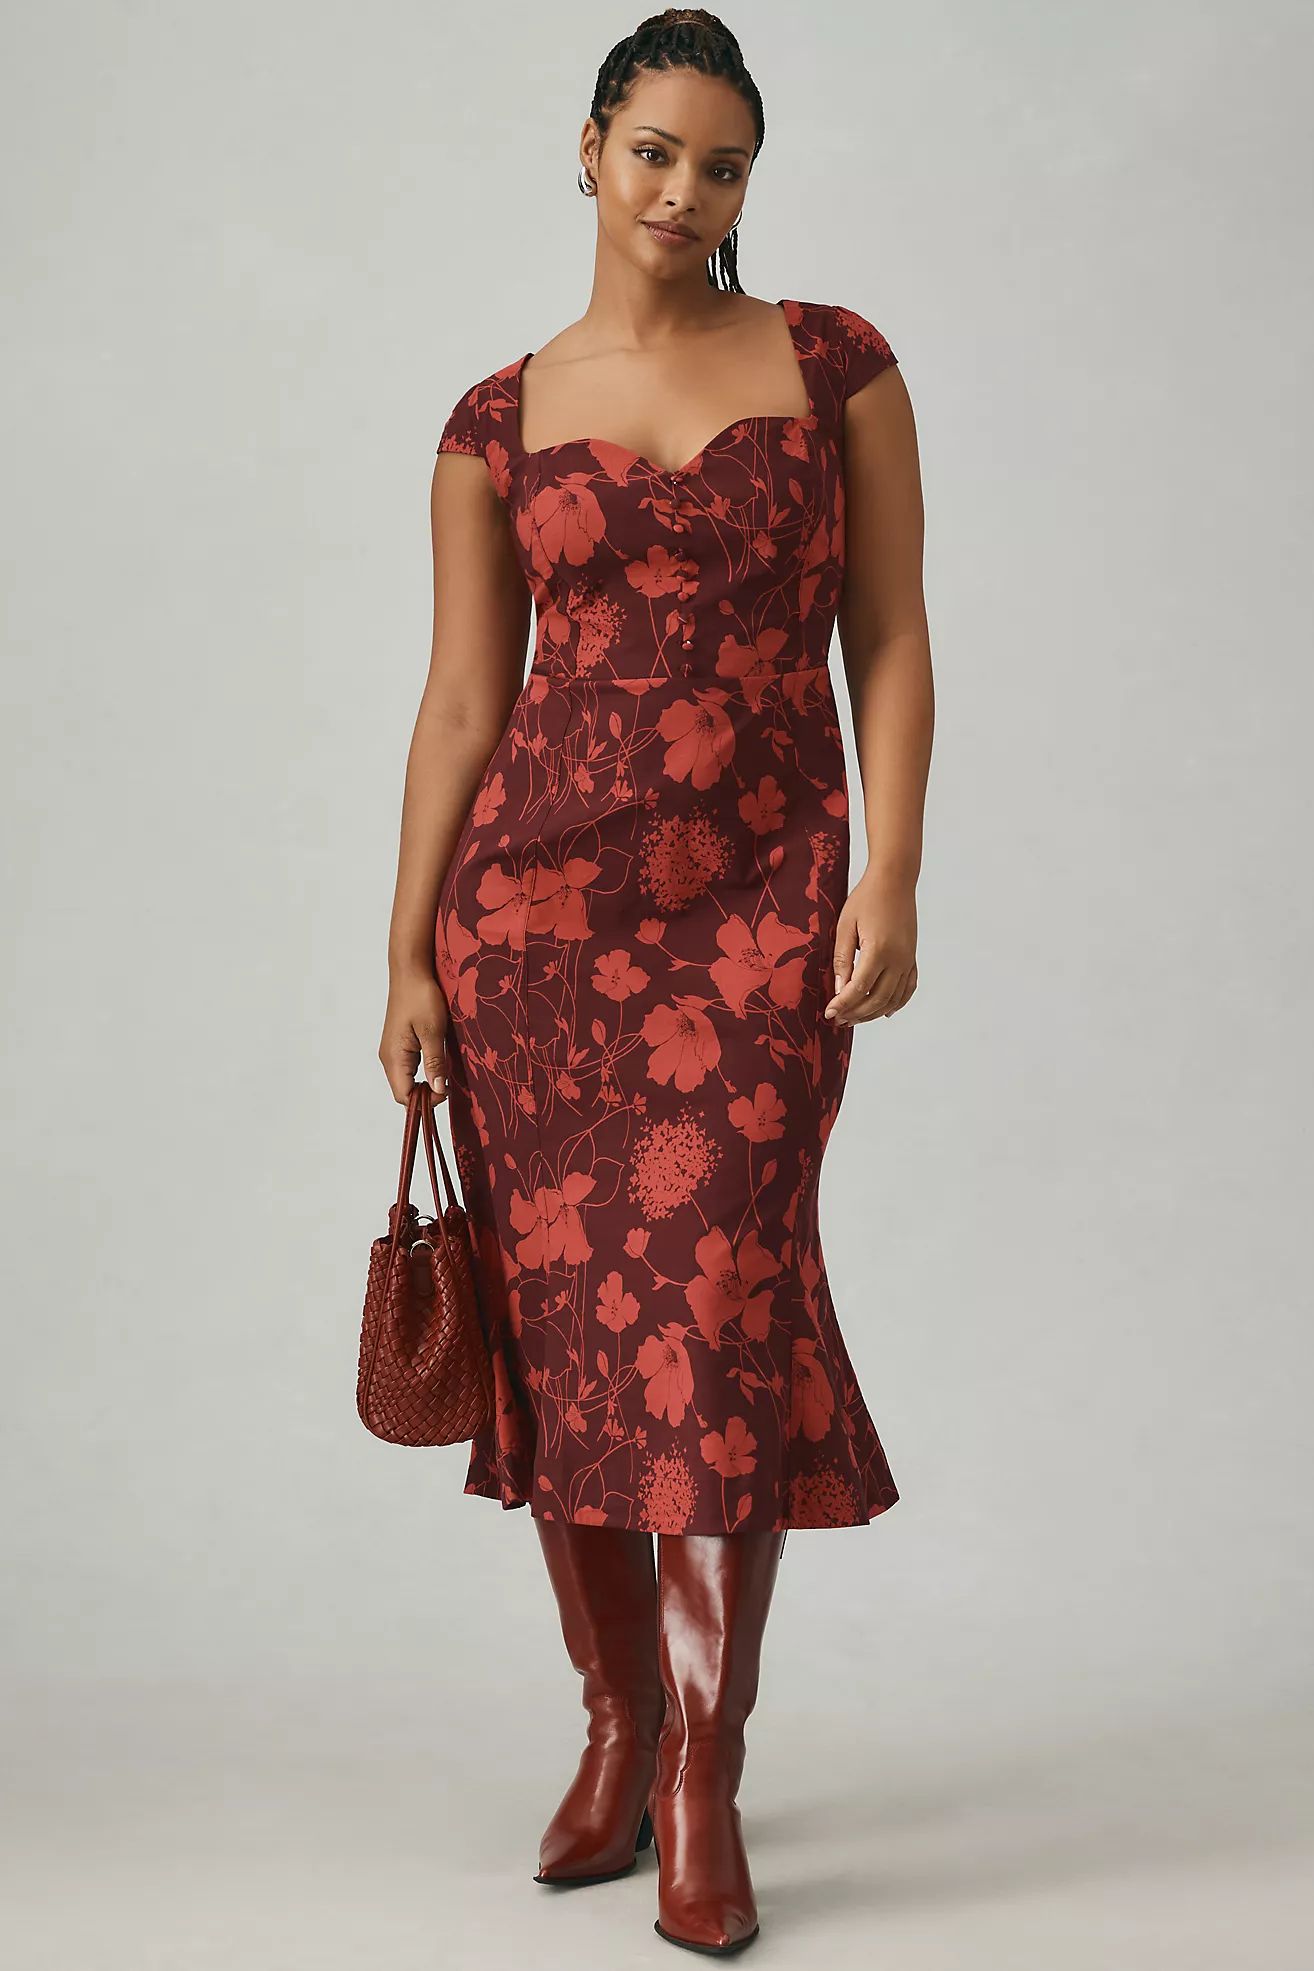 The Cecily Fit & Flare Sweetheart Dress by Maeve | Anthropologie (US)